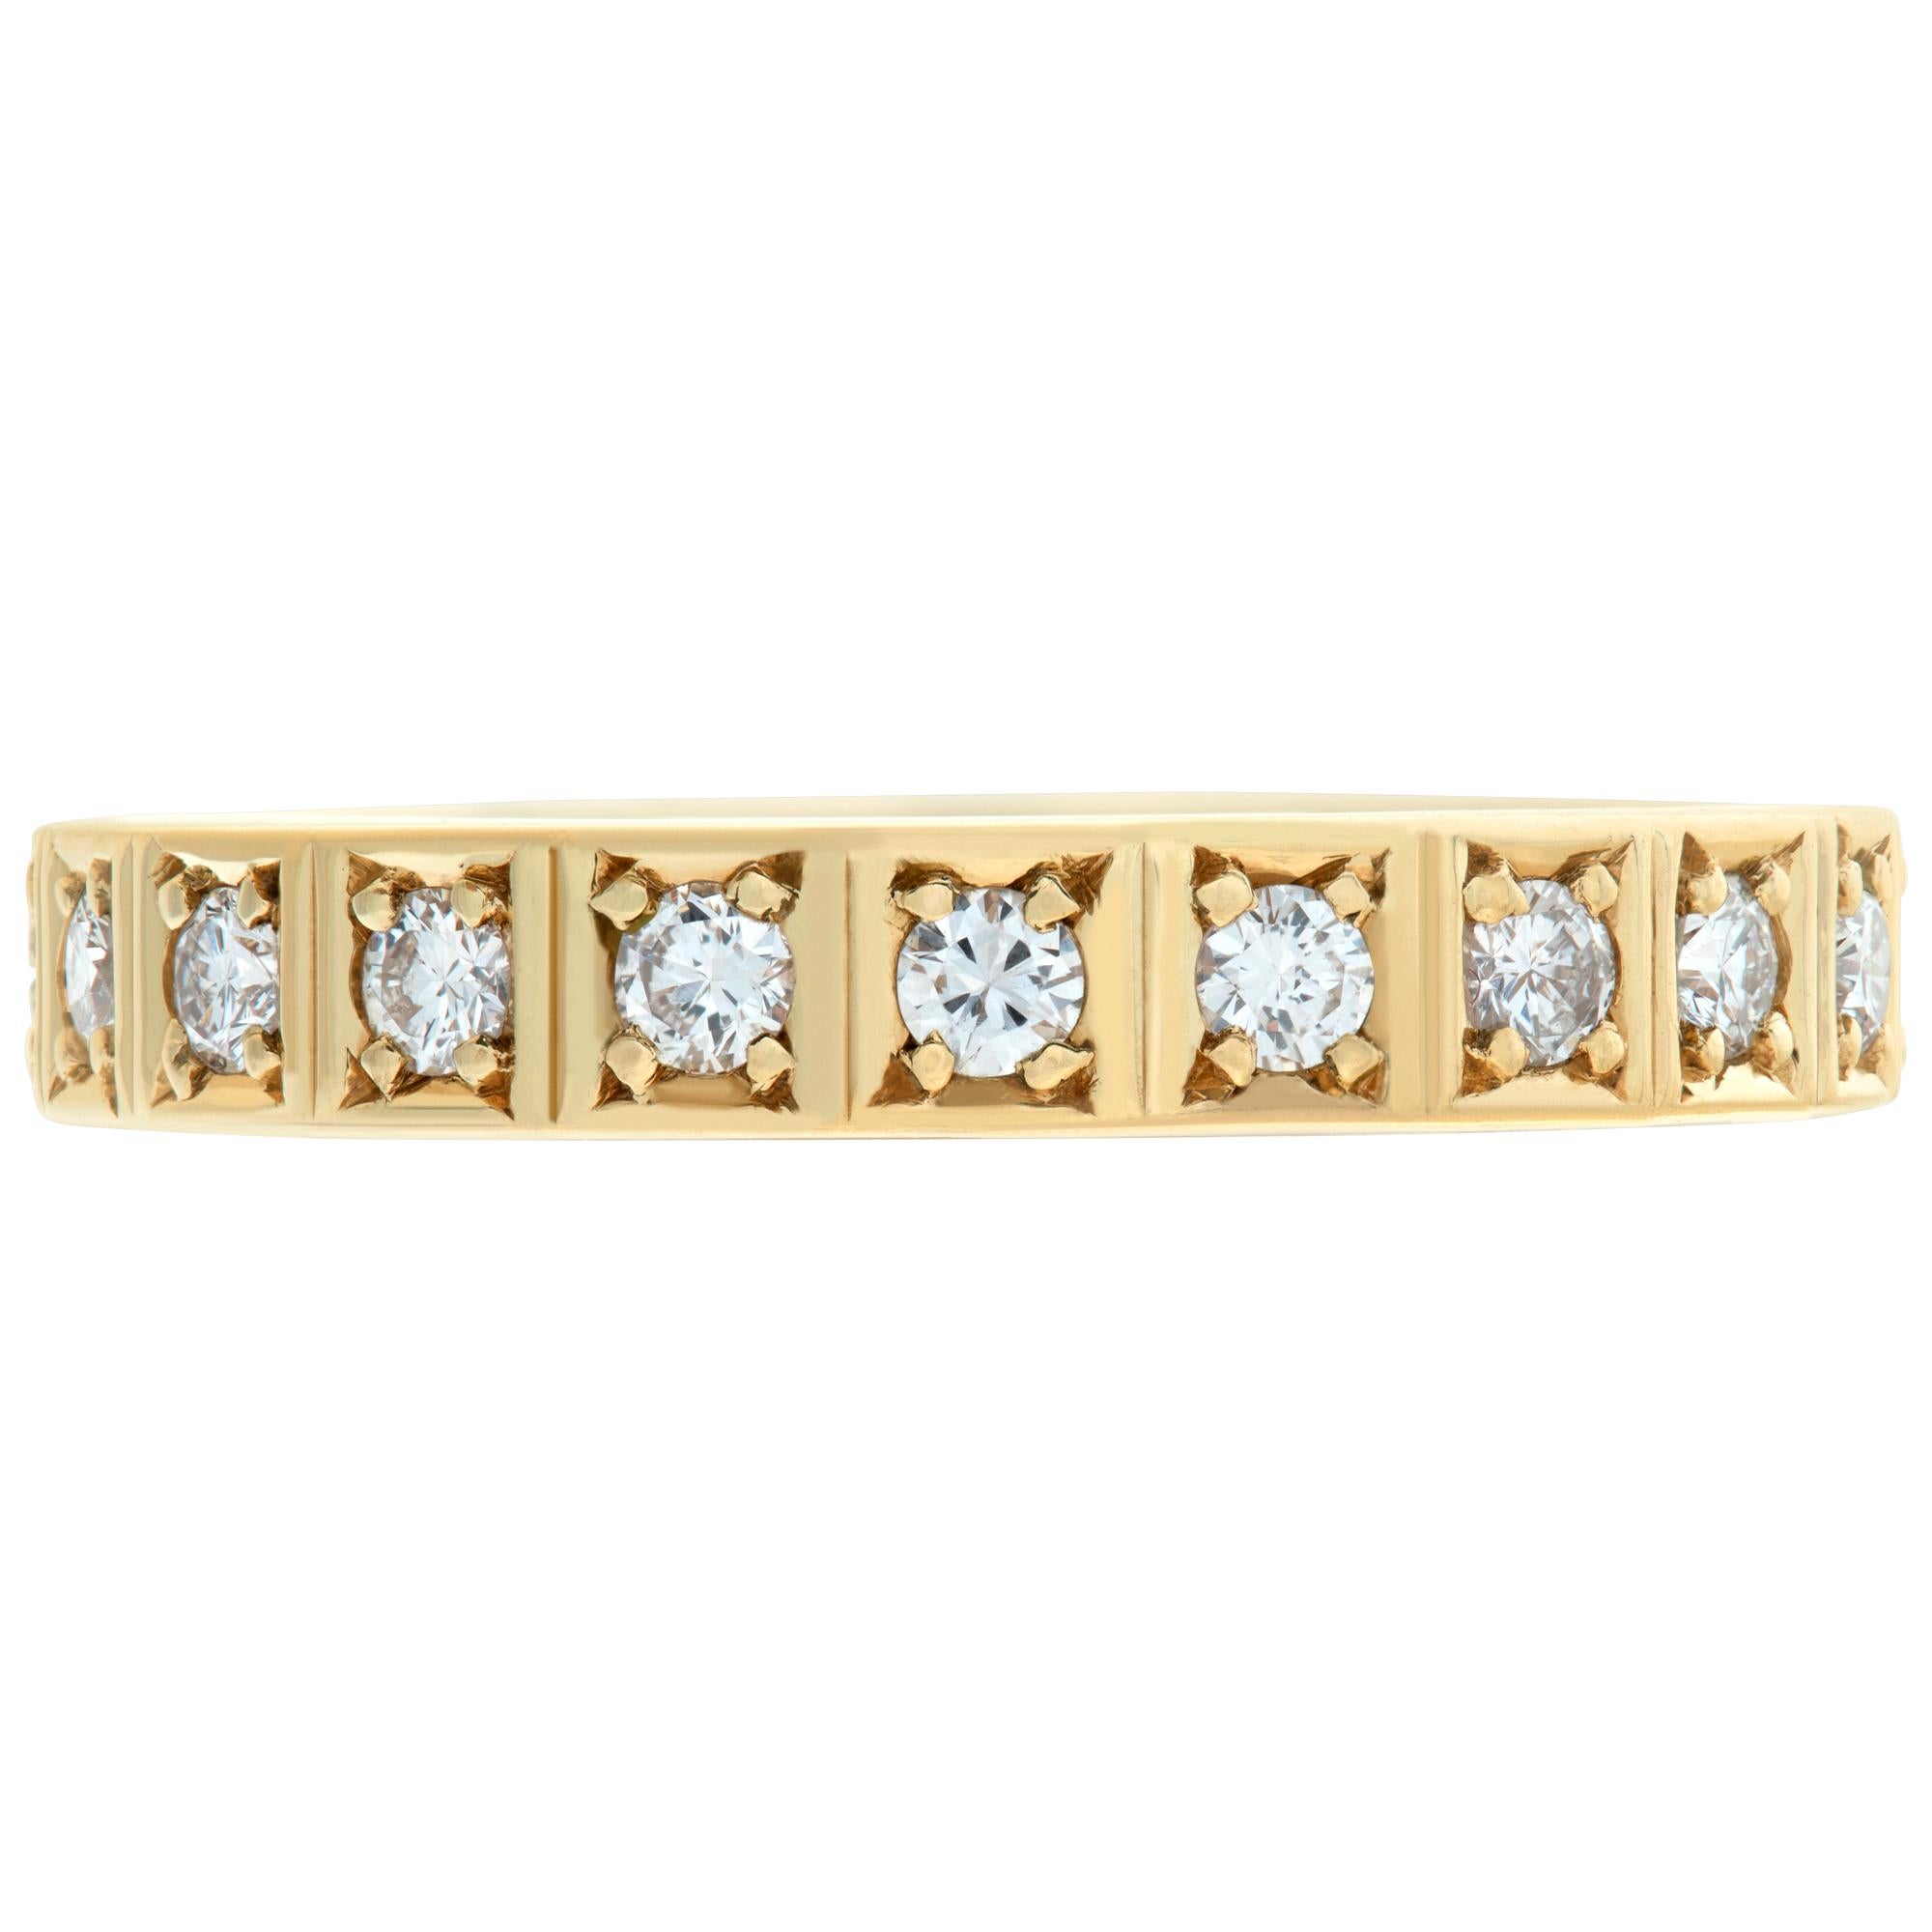 Adorable 14k yellow gold eternity band with approximately 0.60 carats in G-H Color, VS-SI Clarity round diamonds. Size 6, width 3mm.
